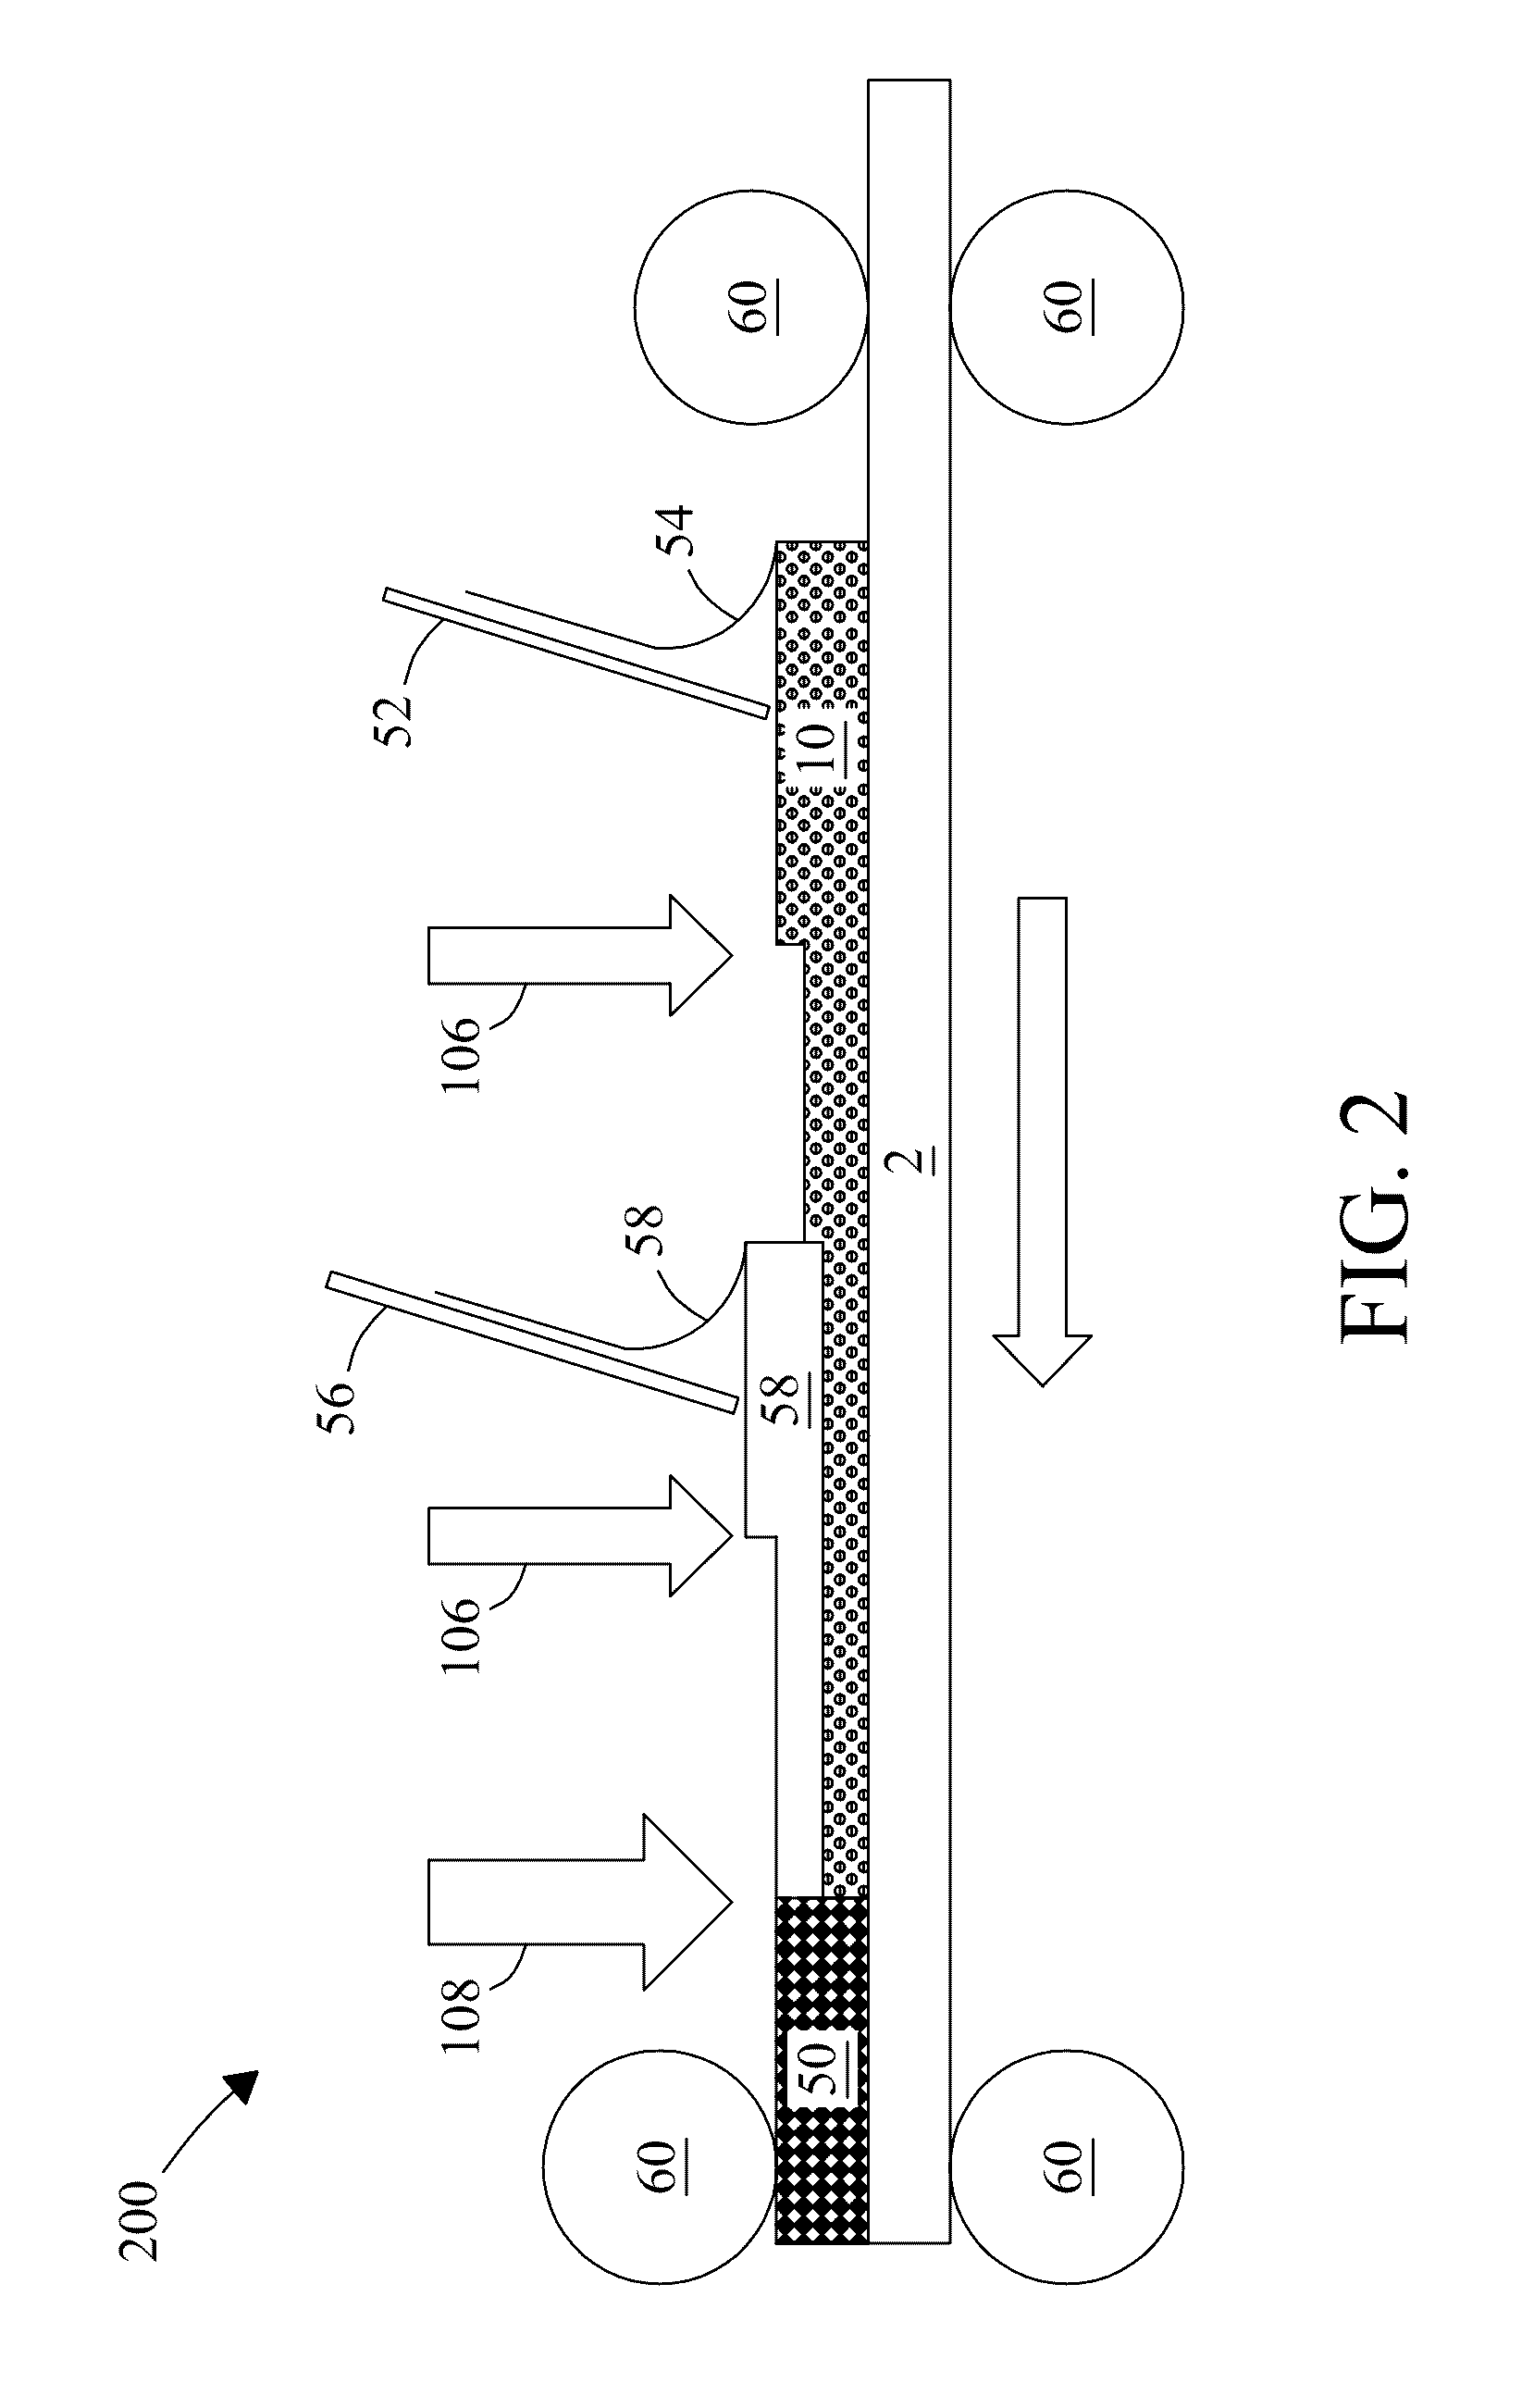 Subwavelength coatings and methods for making and using same